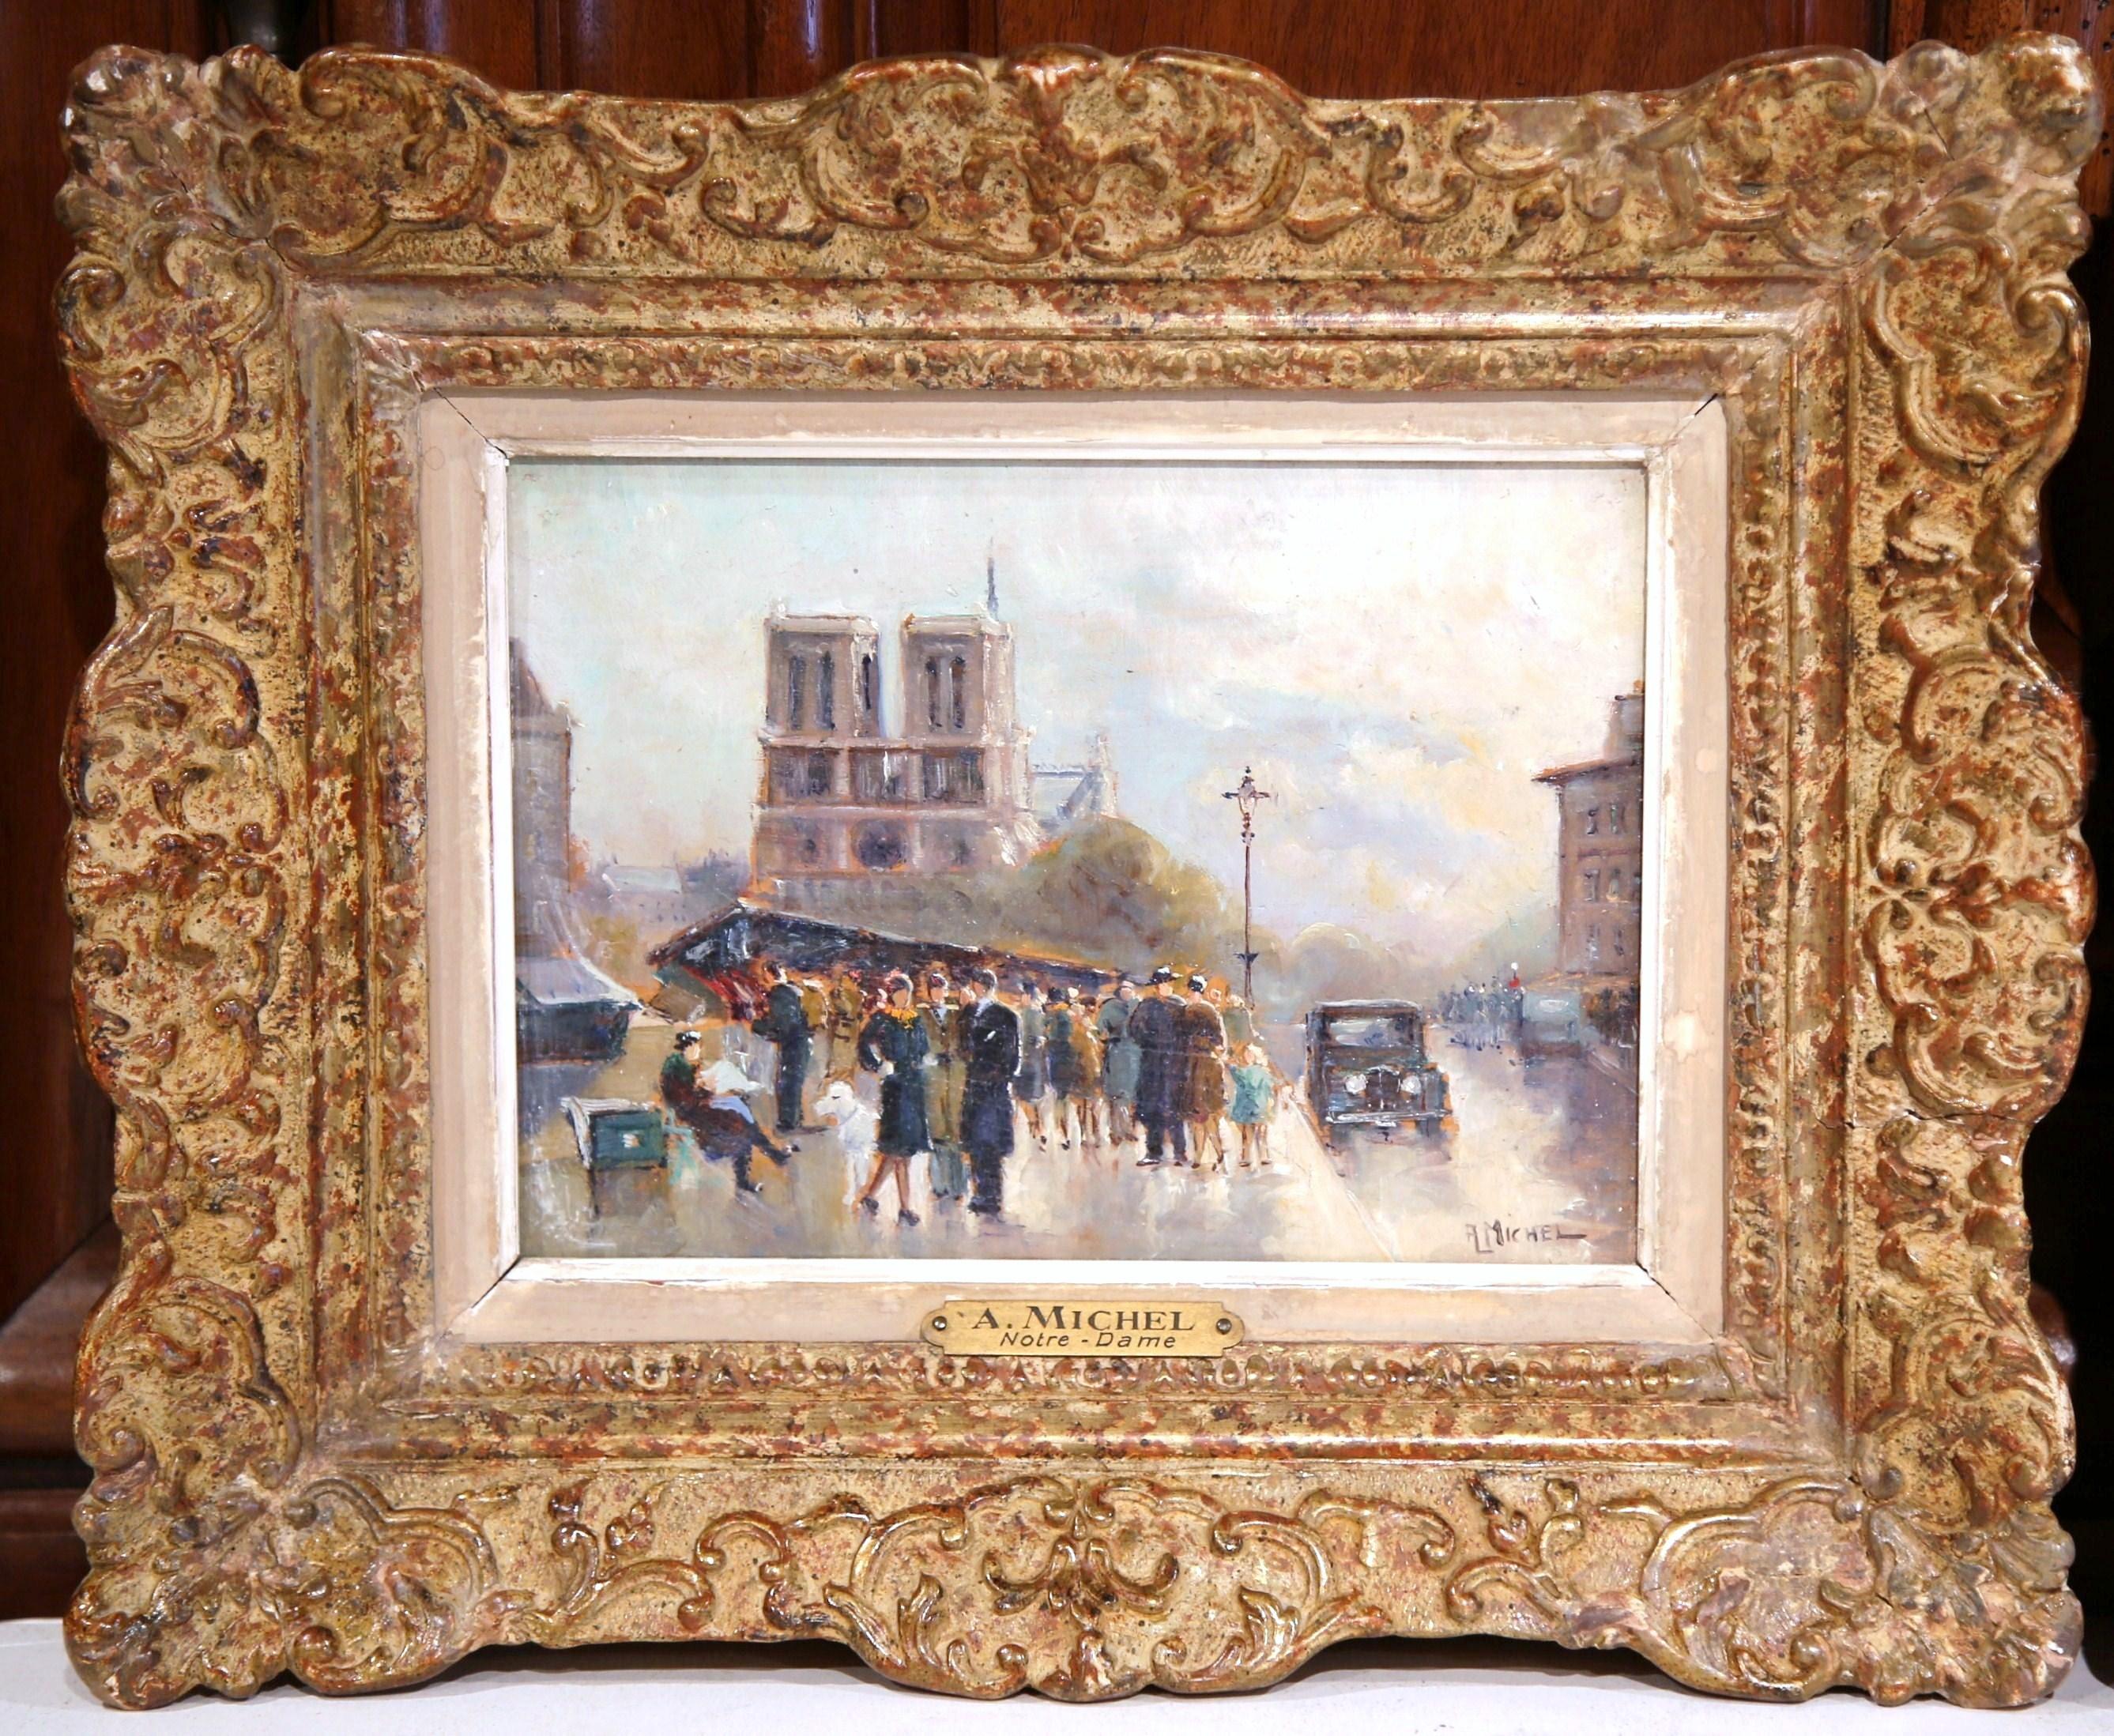 This beautiful antique oil on board paintings were created in France, circa 1942. Each painting, set in an ornate, carved gilt frame, features an iconic landmark on the “Île de la Cite” in Paris. One painting depicts 